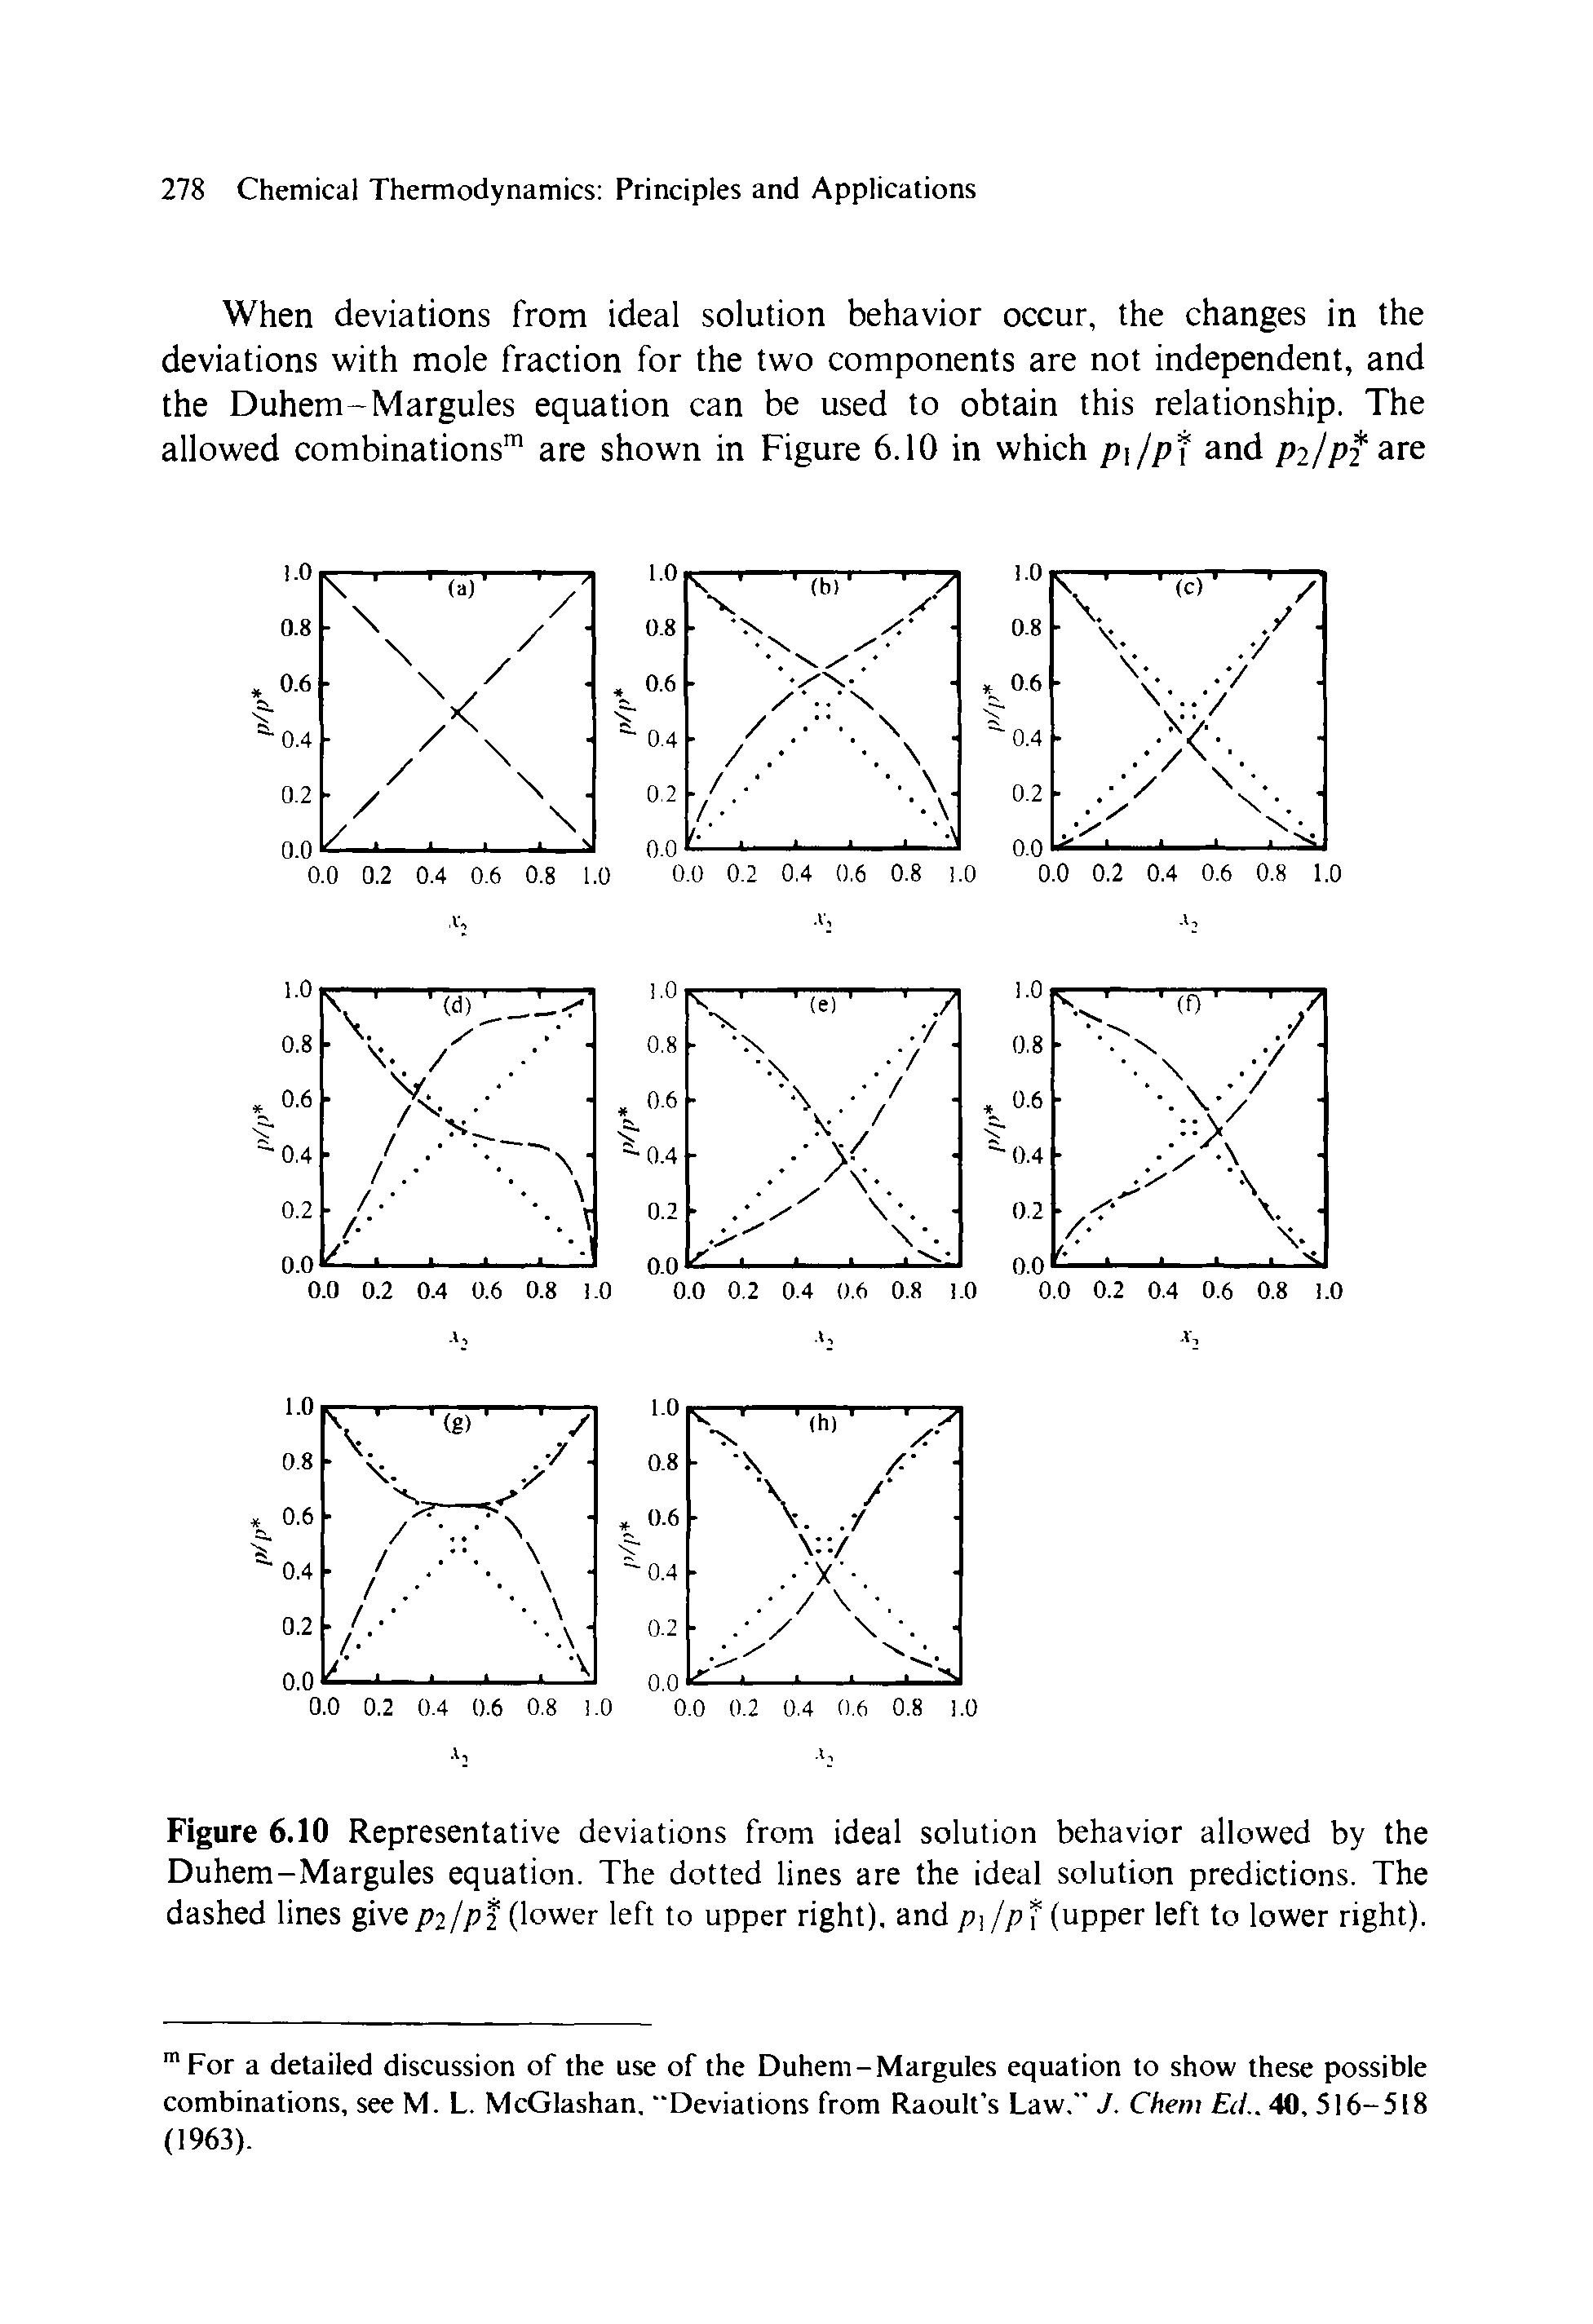 Figure 6.10 Representative deviations from ideal solution behavior allowed by the Duhem-Margules equation. The dotted lines are the ideal solution predictions. The dashed lines giveP2IP2 (lower left to upper right), and p jp (upper left to lower right).